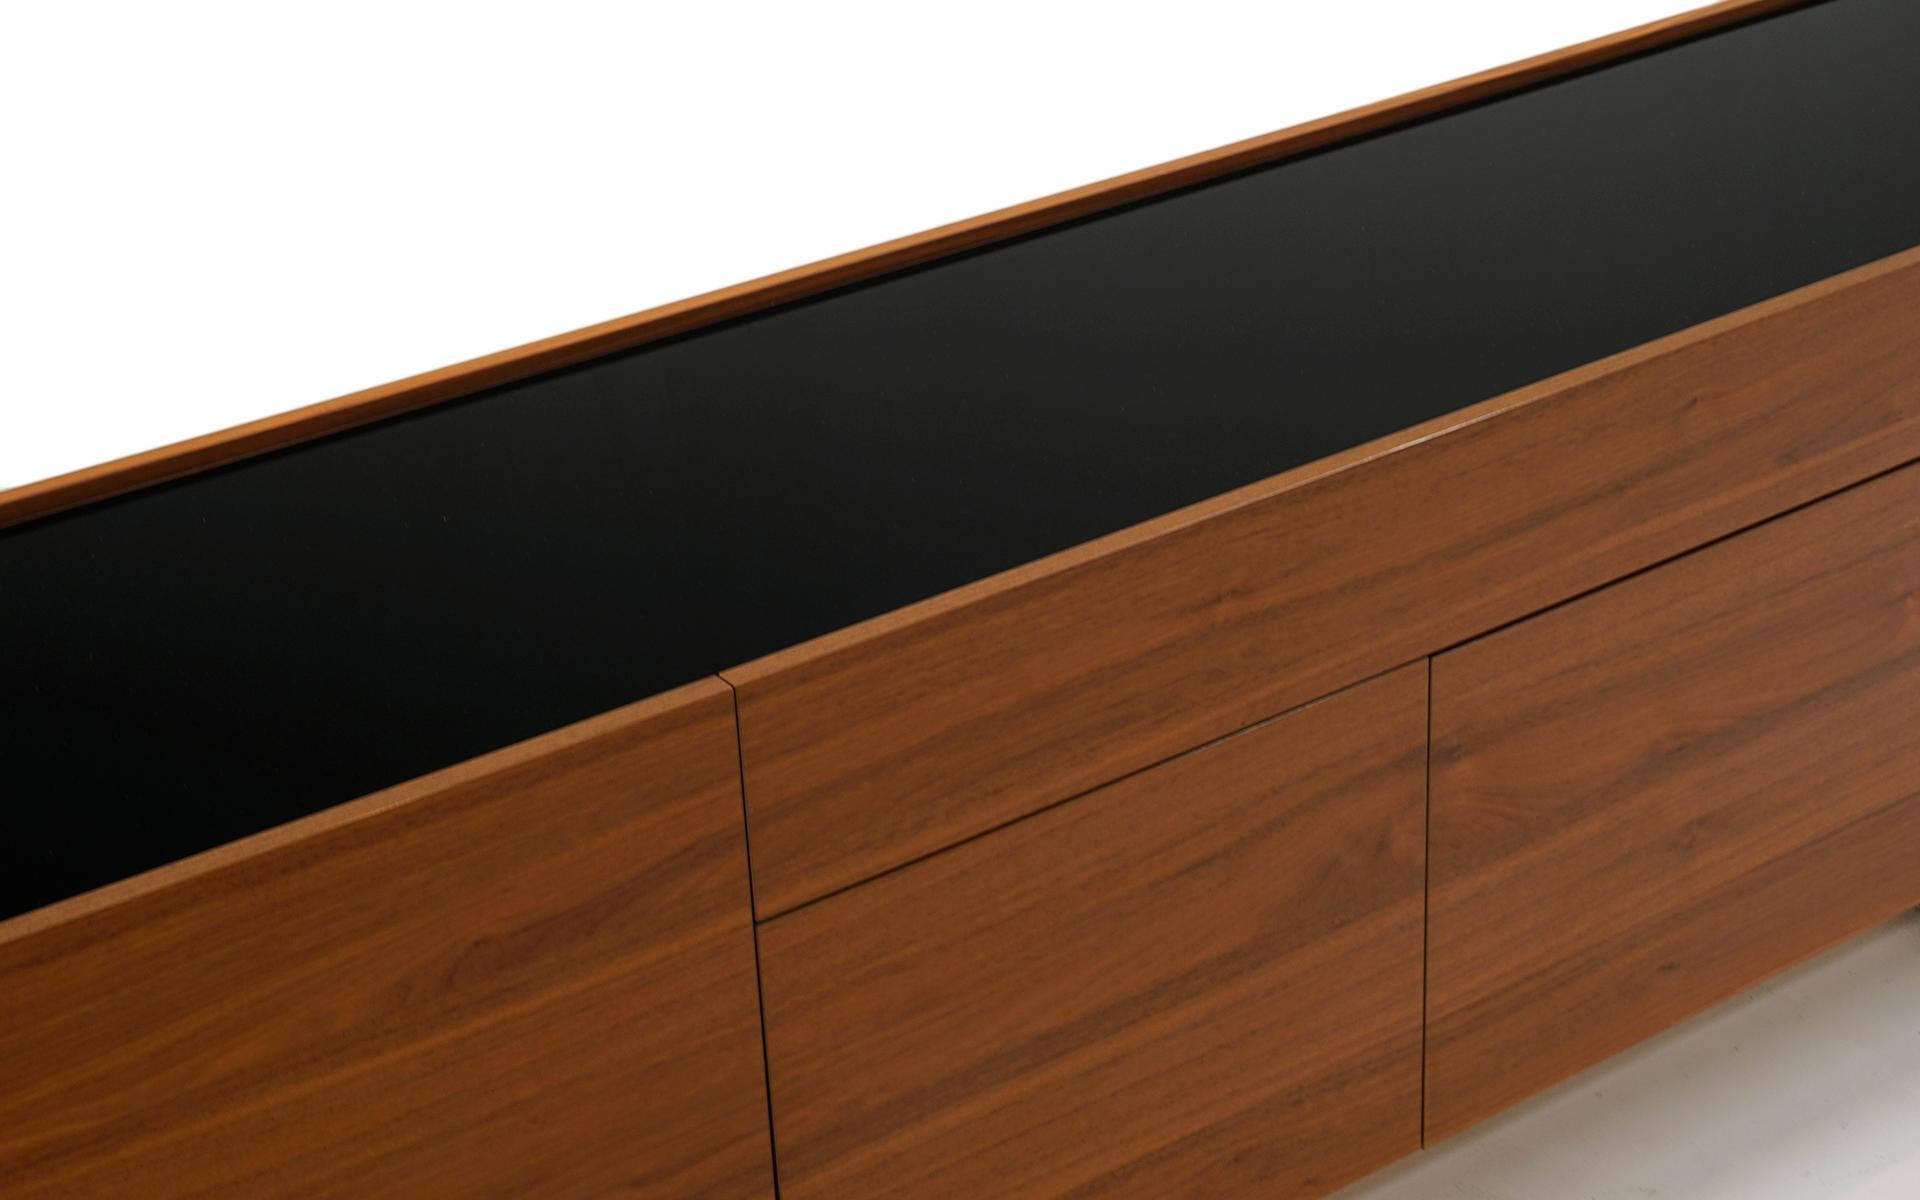 Italian Walnut Credenza w/ Black Glass Top, Chrome Sled Base by Calligaris, Italy, 2010 For Sale